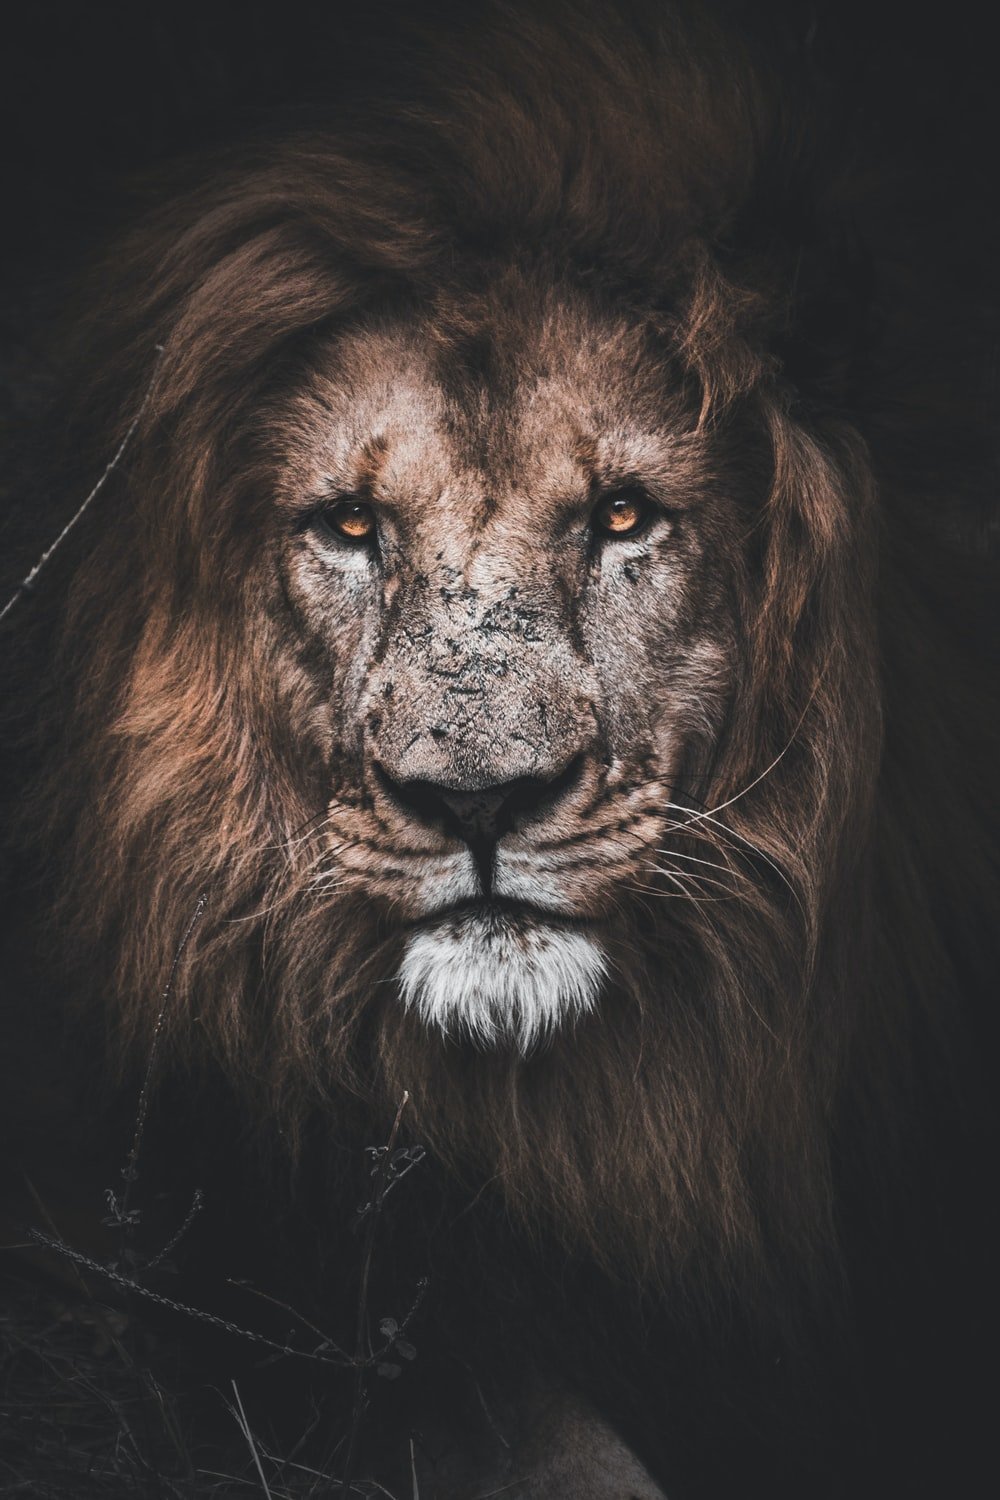 Lion Face Picture. Download Free Image